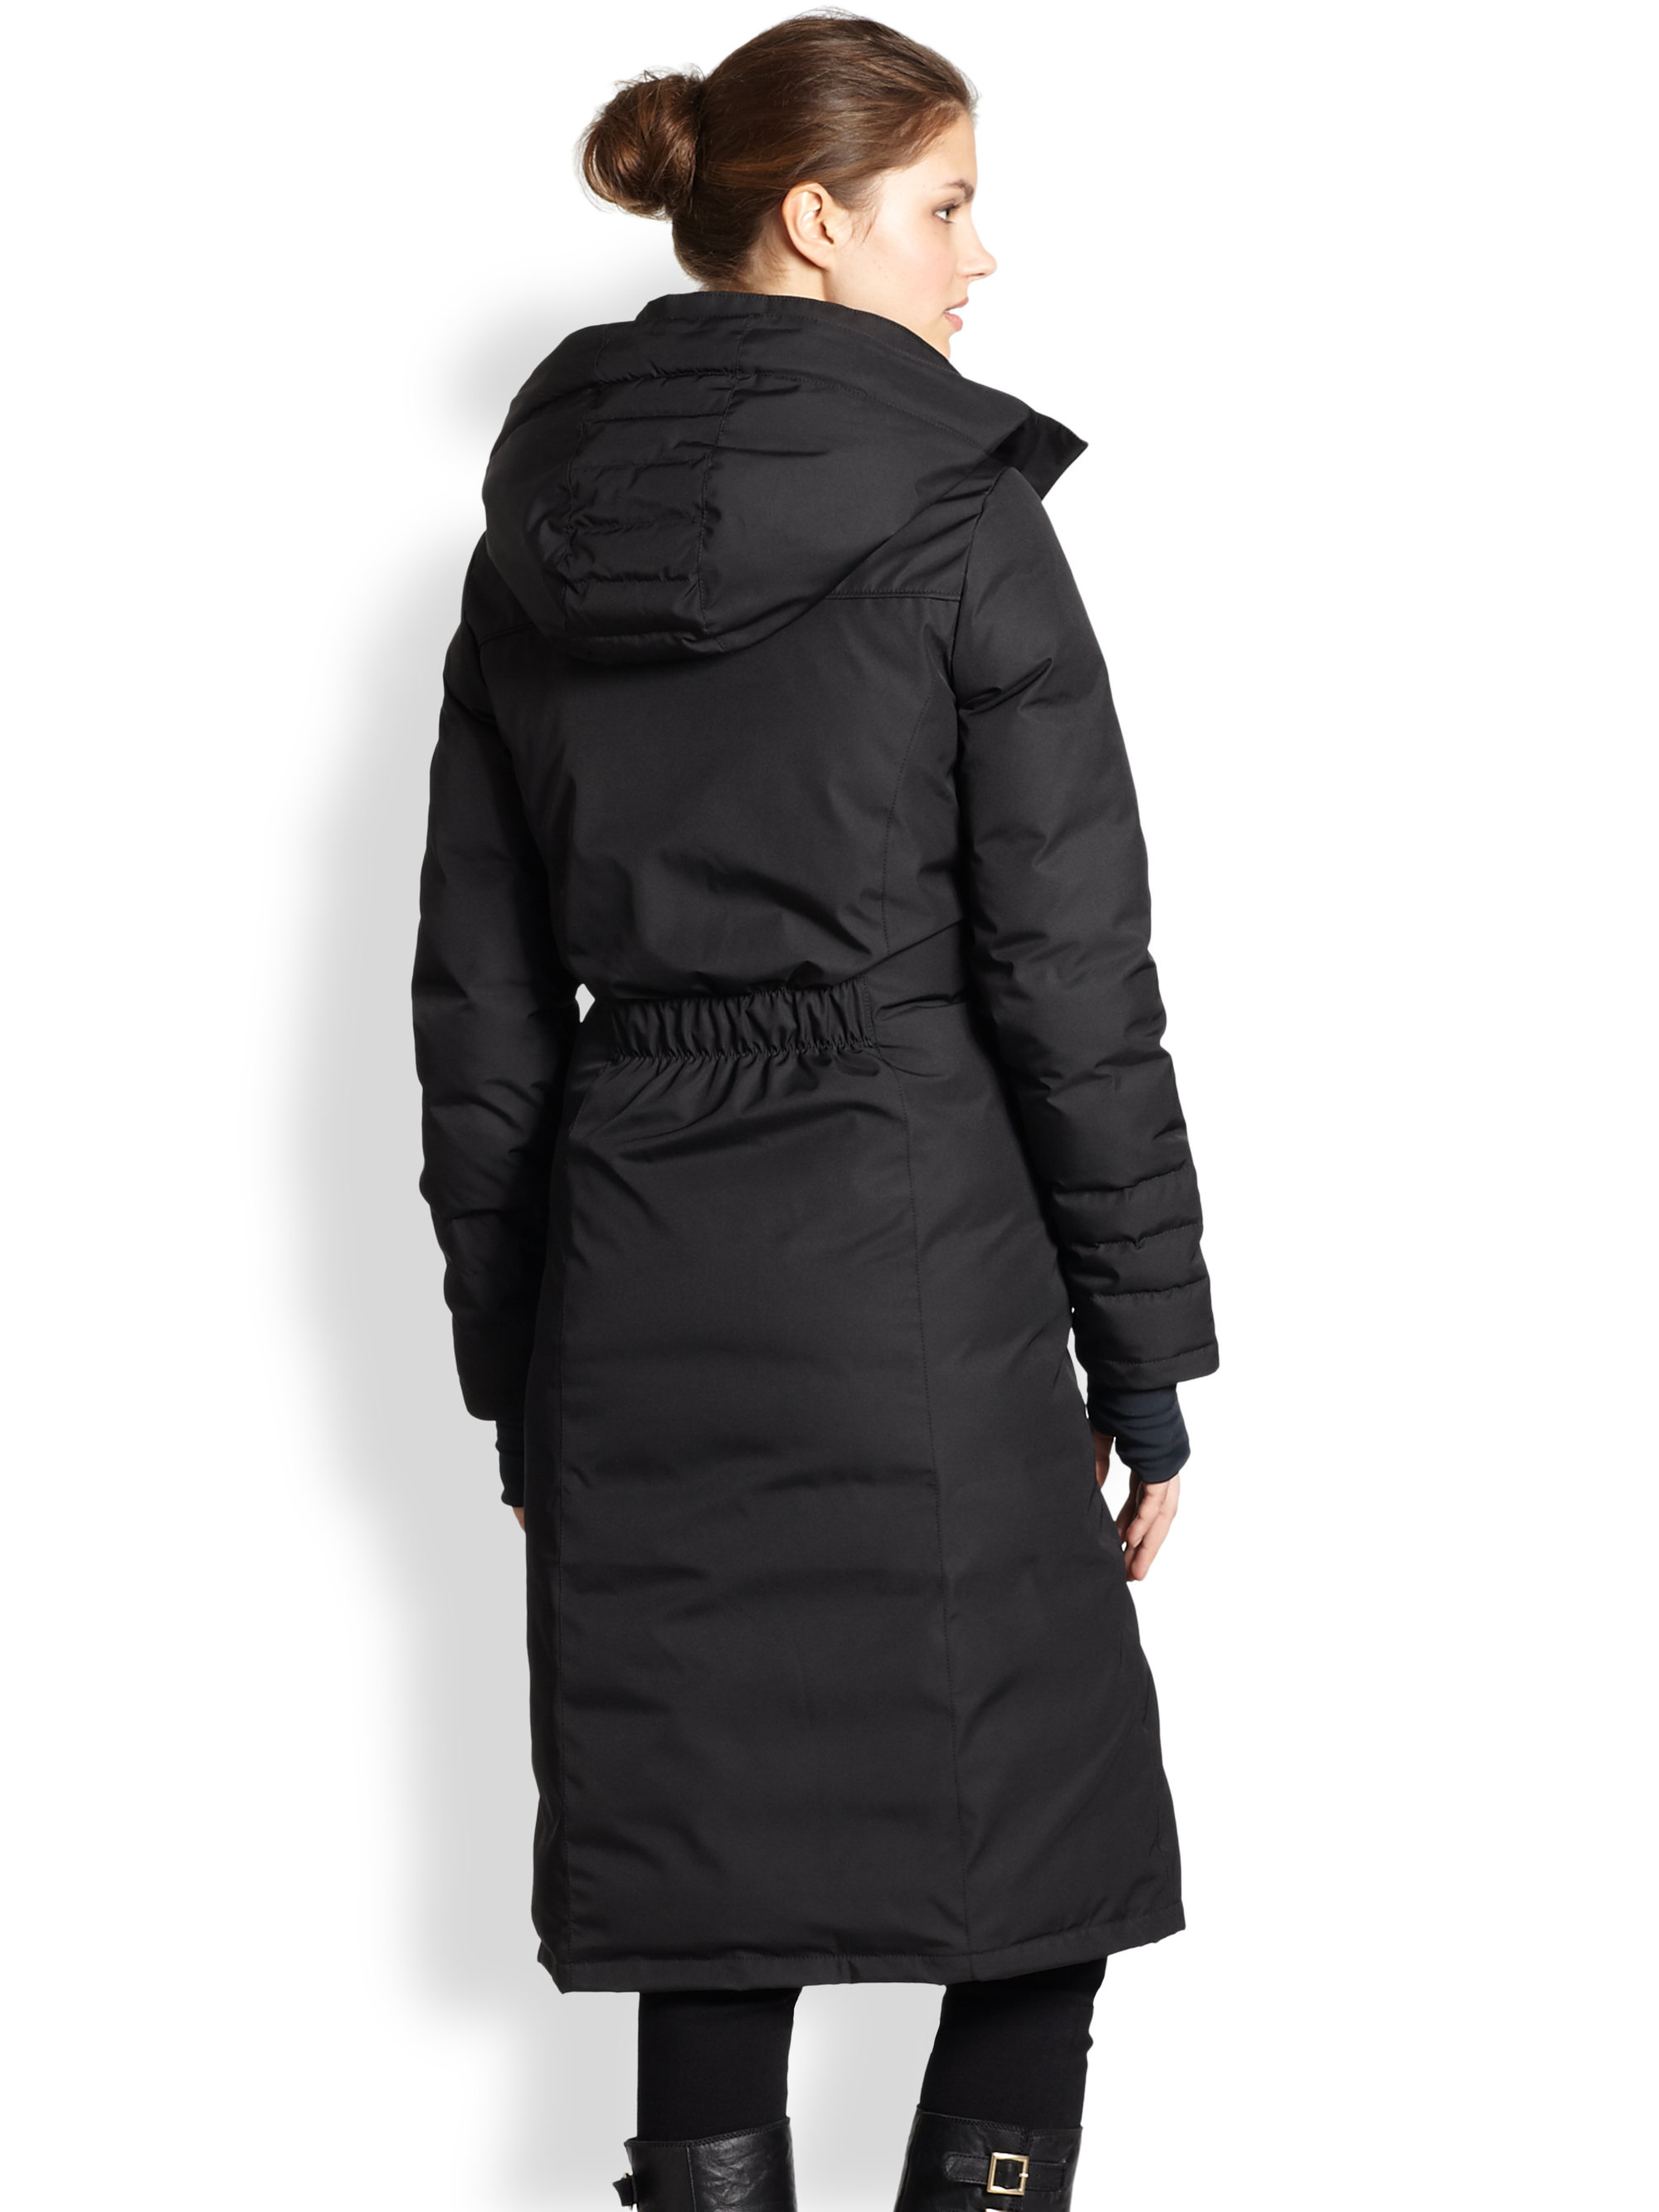 canada goose jacket on sale with free shipping by canada